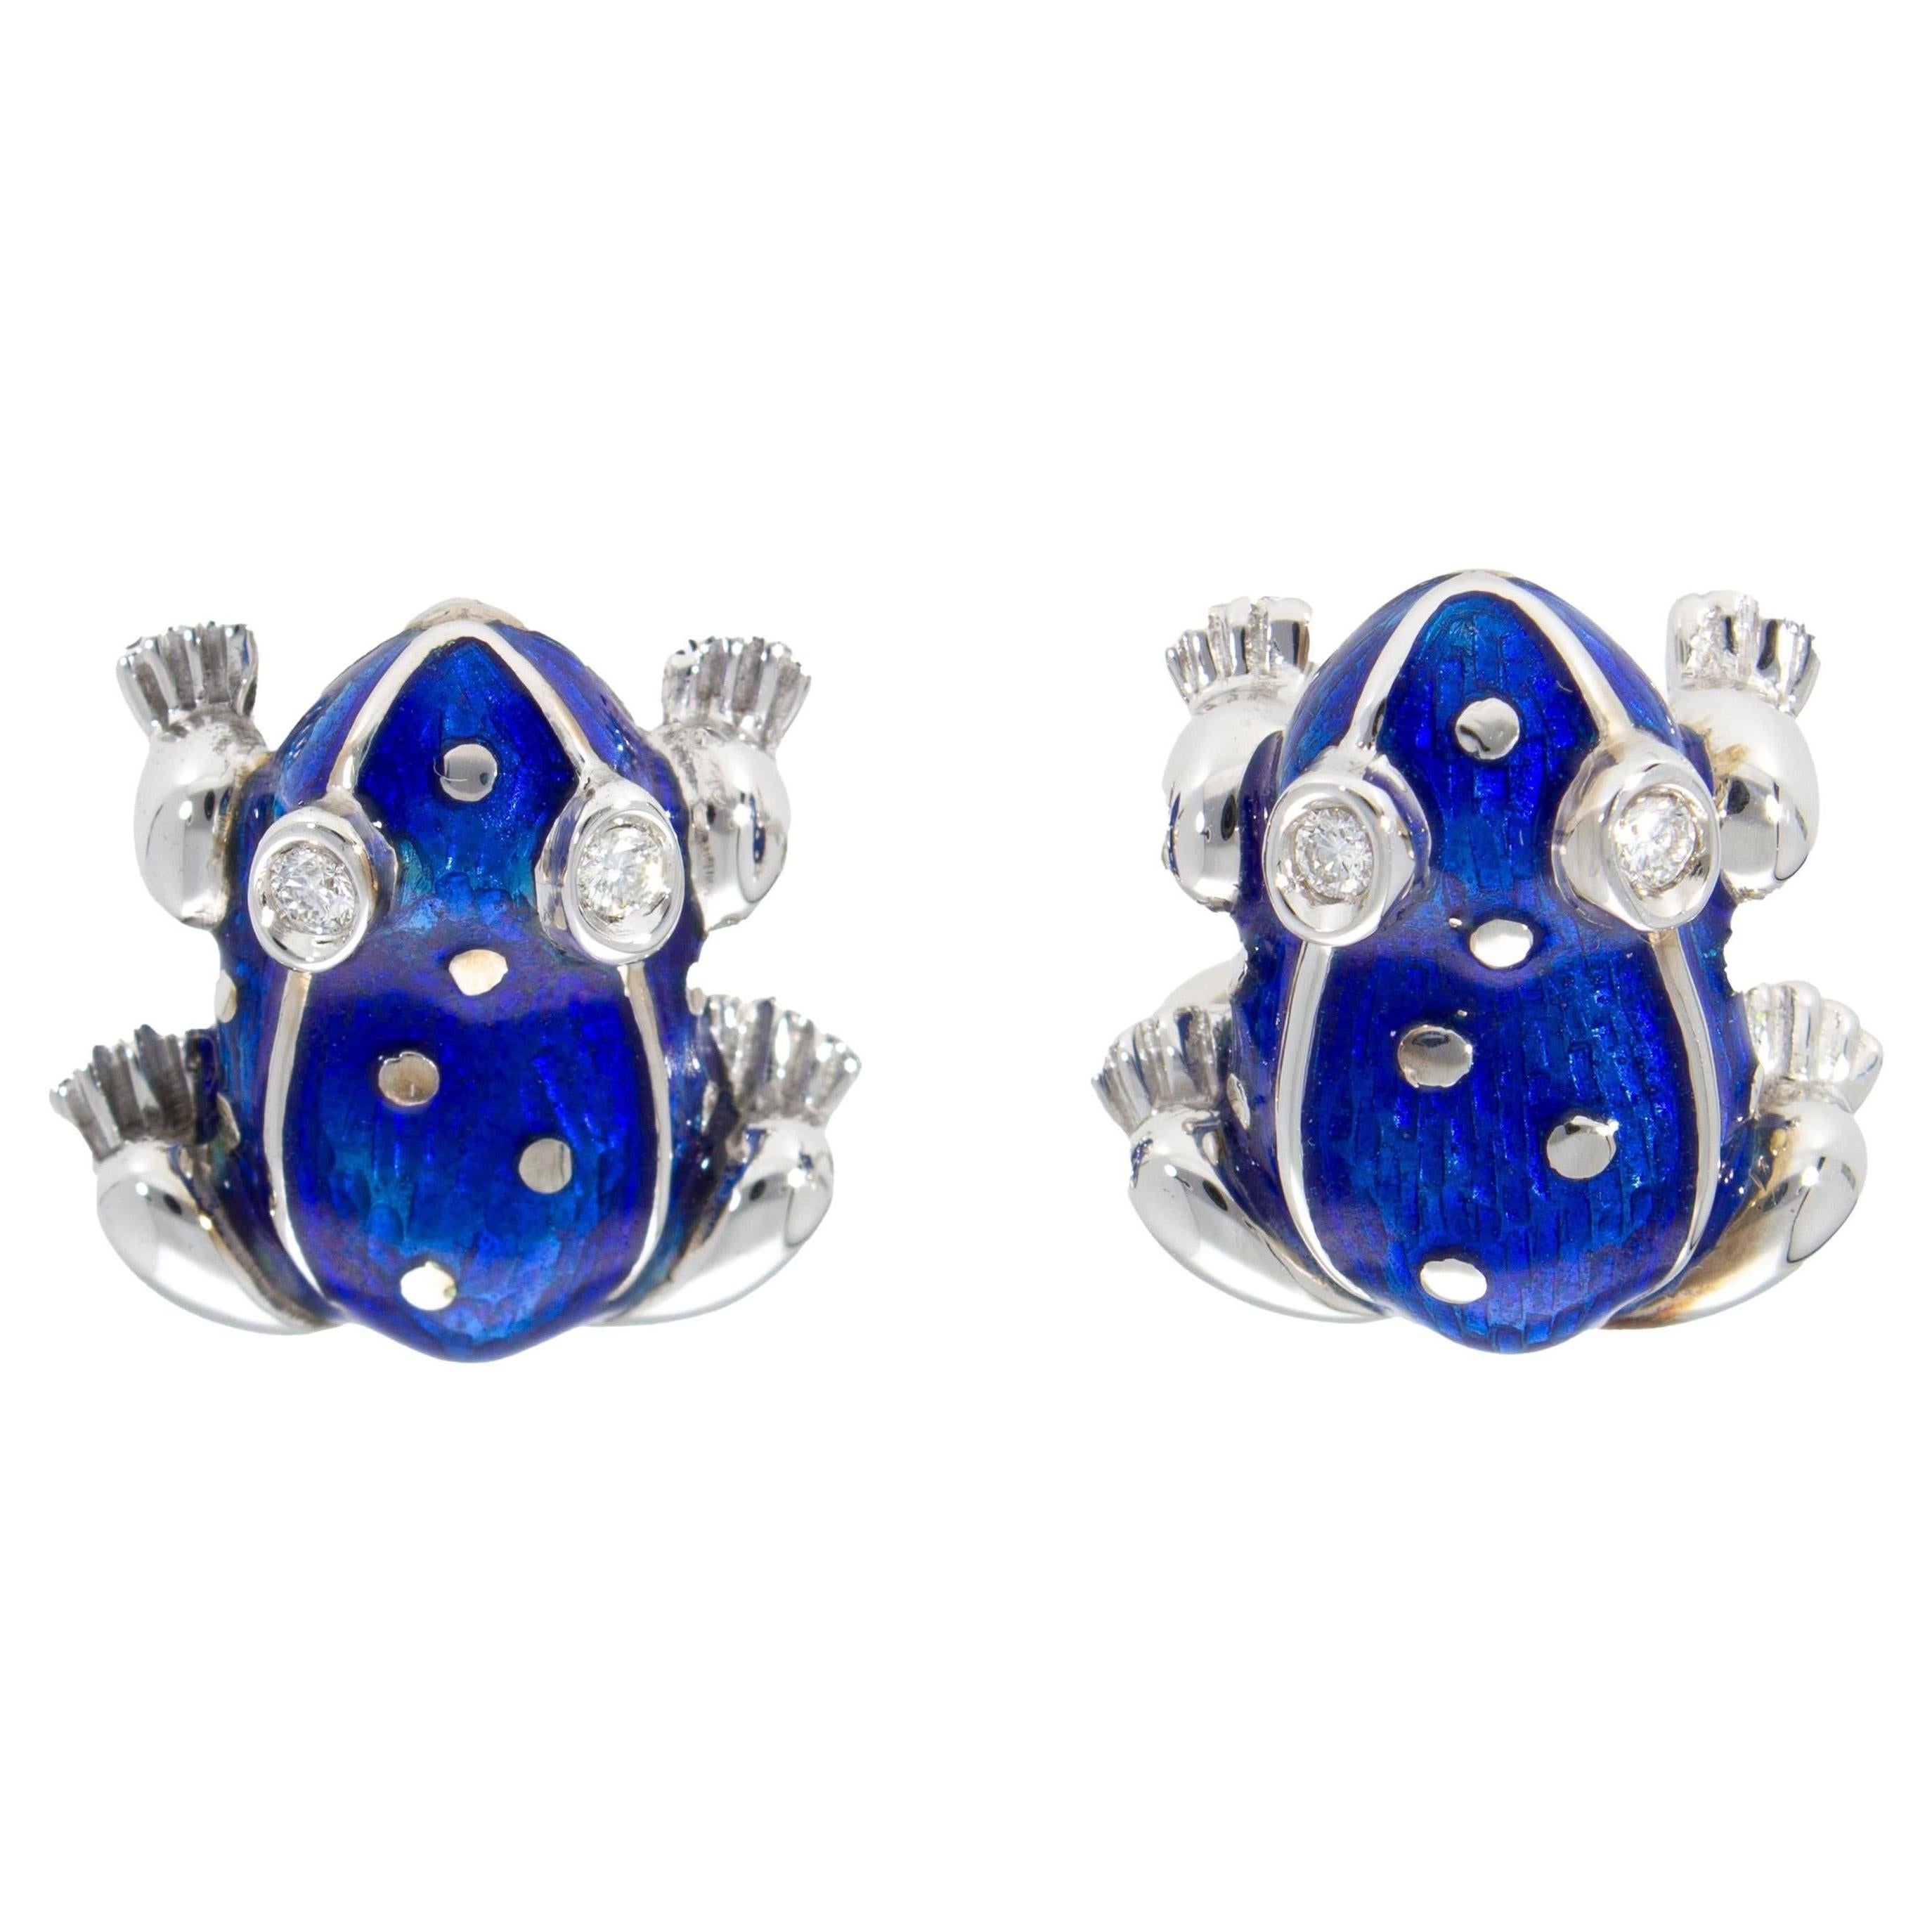 Cufflinks in white gold 18 Kt and blue enamel and diamonds. 
The cufflinks are of Italian craftsmanship.
The enamels are fixed on the jewel with the ancient fire technique. 
Frog cufflinks have two diamonds in the eye.
They are easy to wear as they